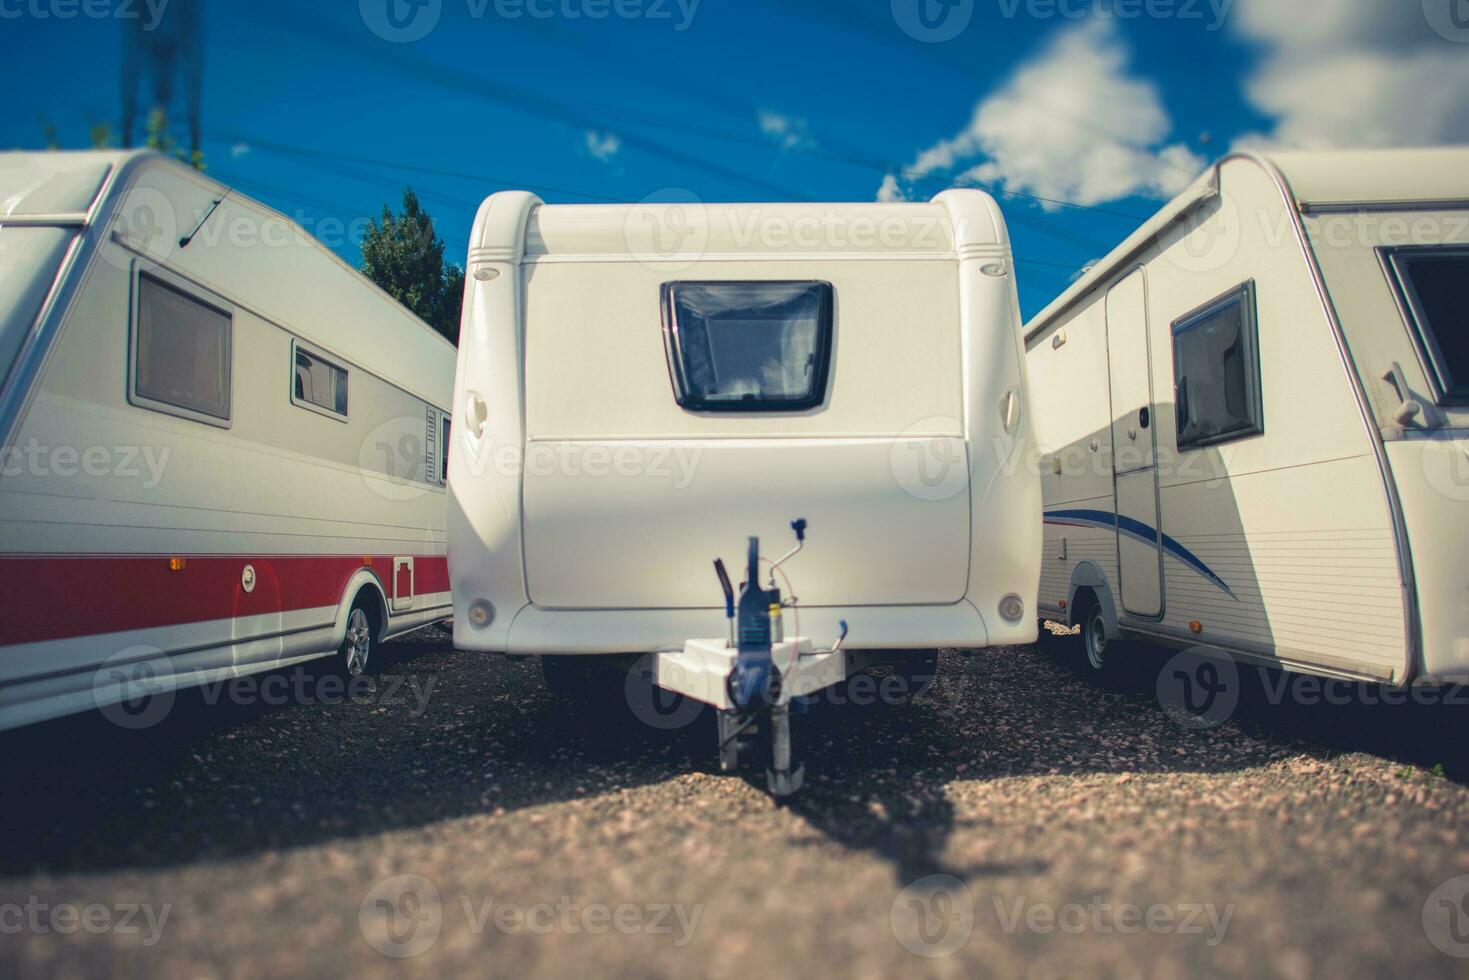 Pre Owned Travel Trailers photo